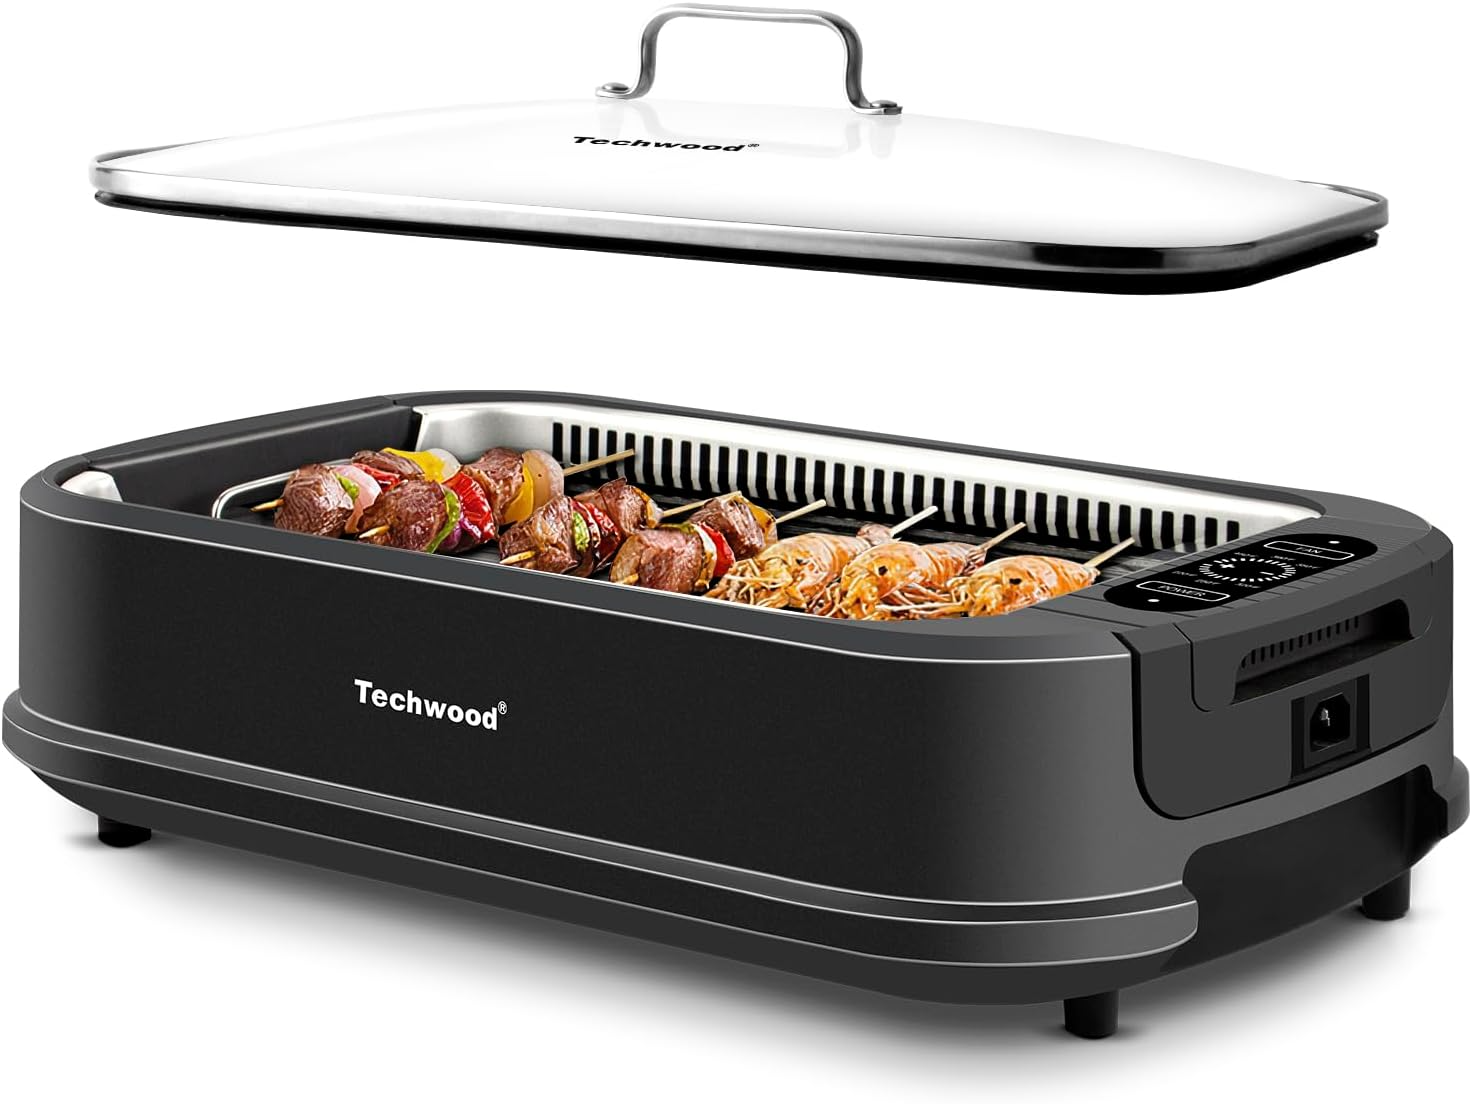 Techwood Indoor Smokeless Grill 1500W Electric Grill with Tempered Glass Lid, Compact & Portable Non-Stick BBQ Grill with Turbo Smoke Extractor Technology, LED Smart Control Panel, Black - Barbecue Whizz...Watch My Smoke!